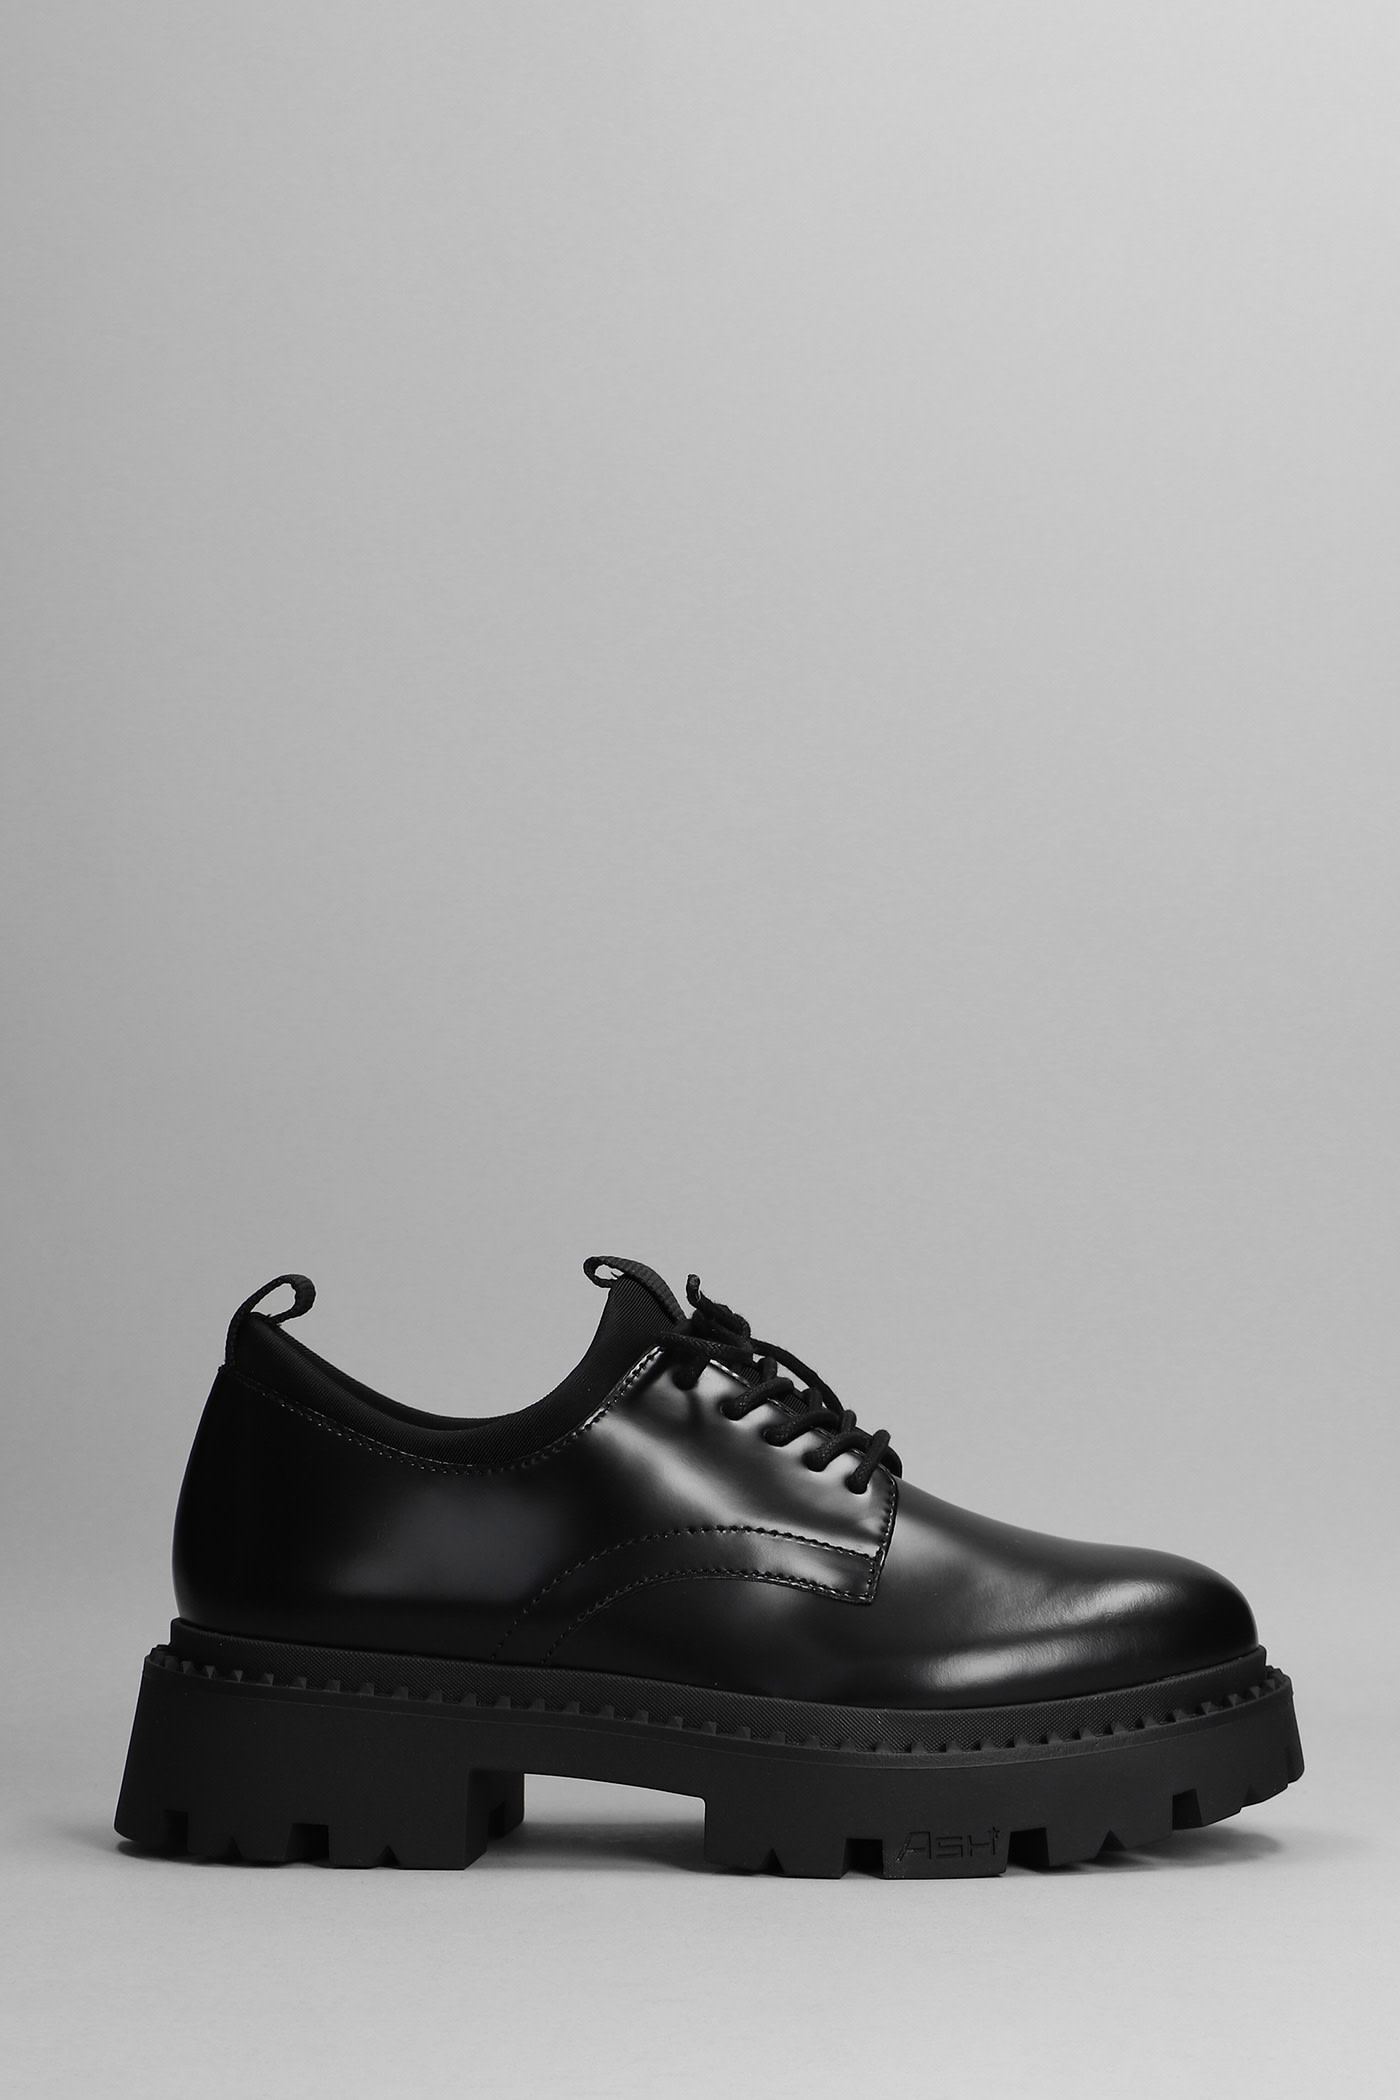 ASH GIANT LACE UP SHOES IN BLACK LEATHER